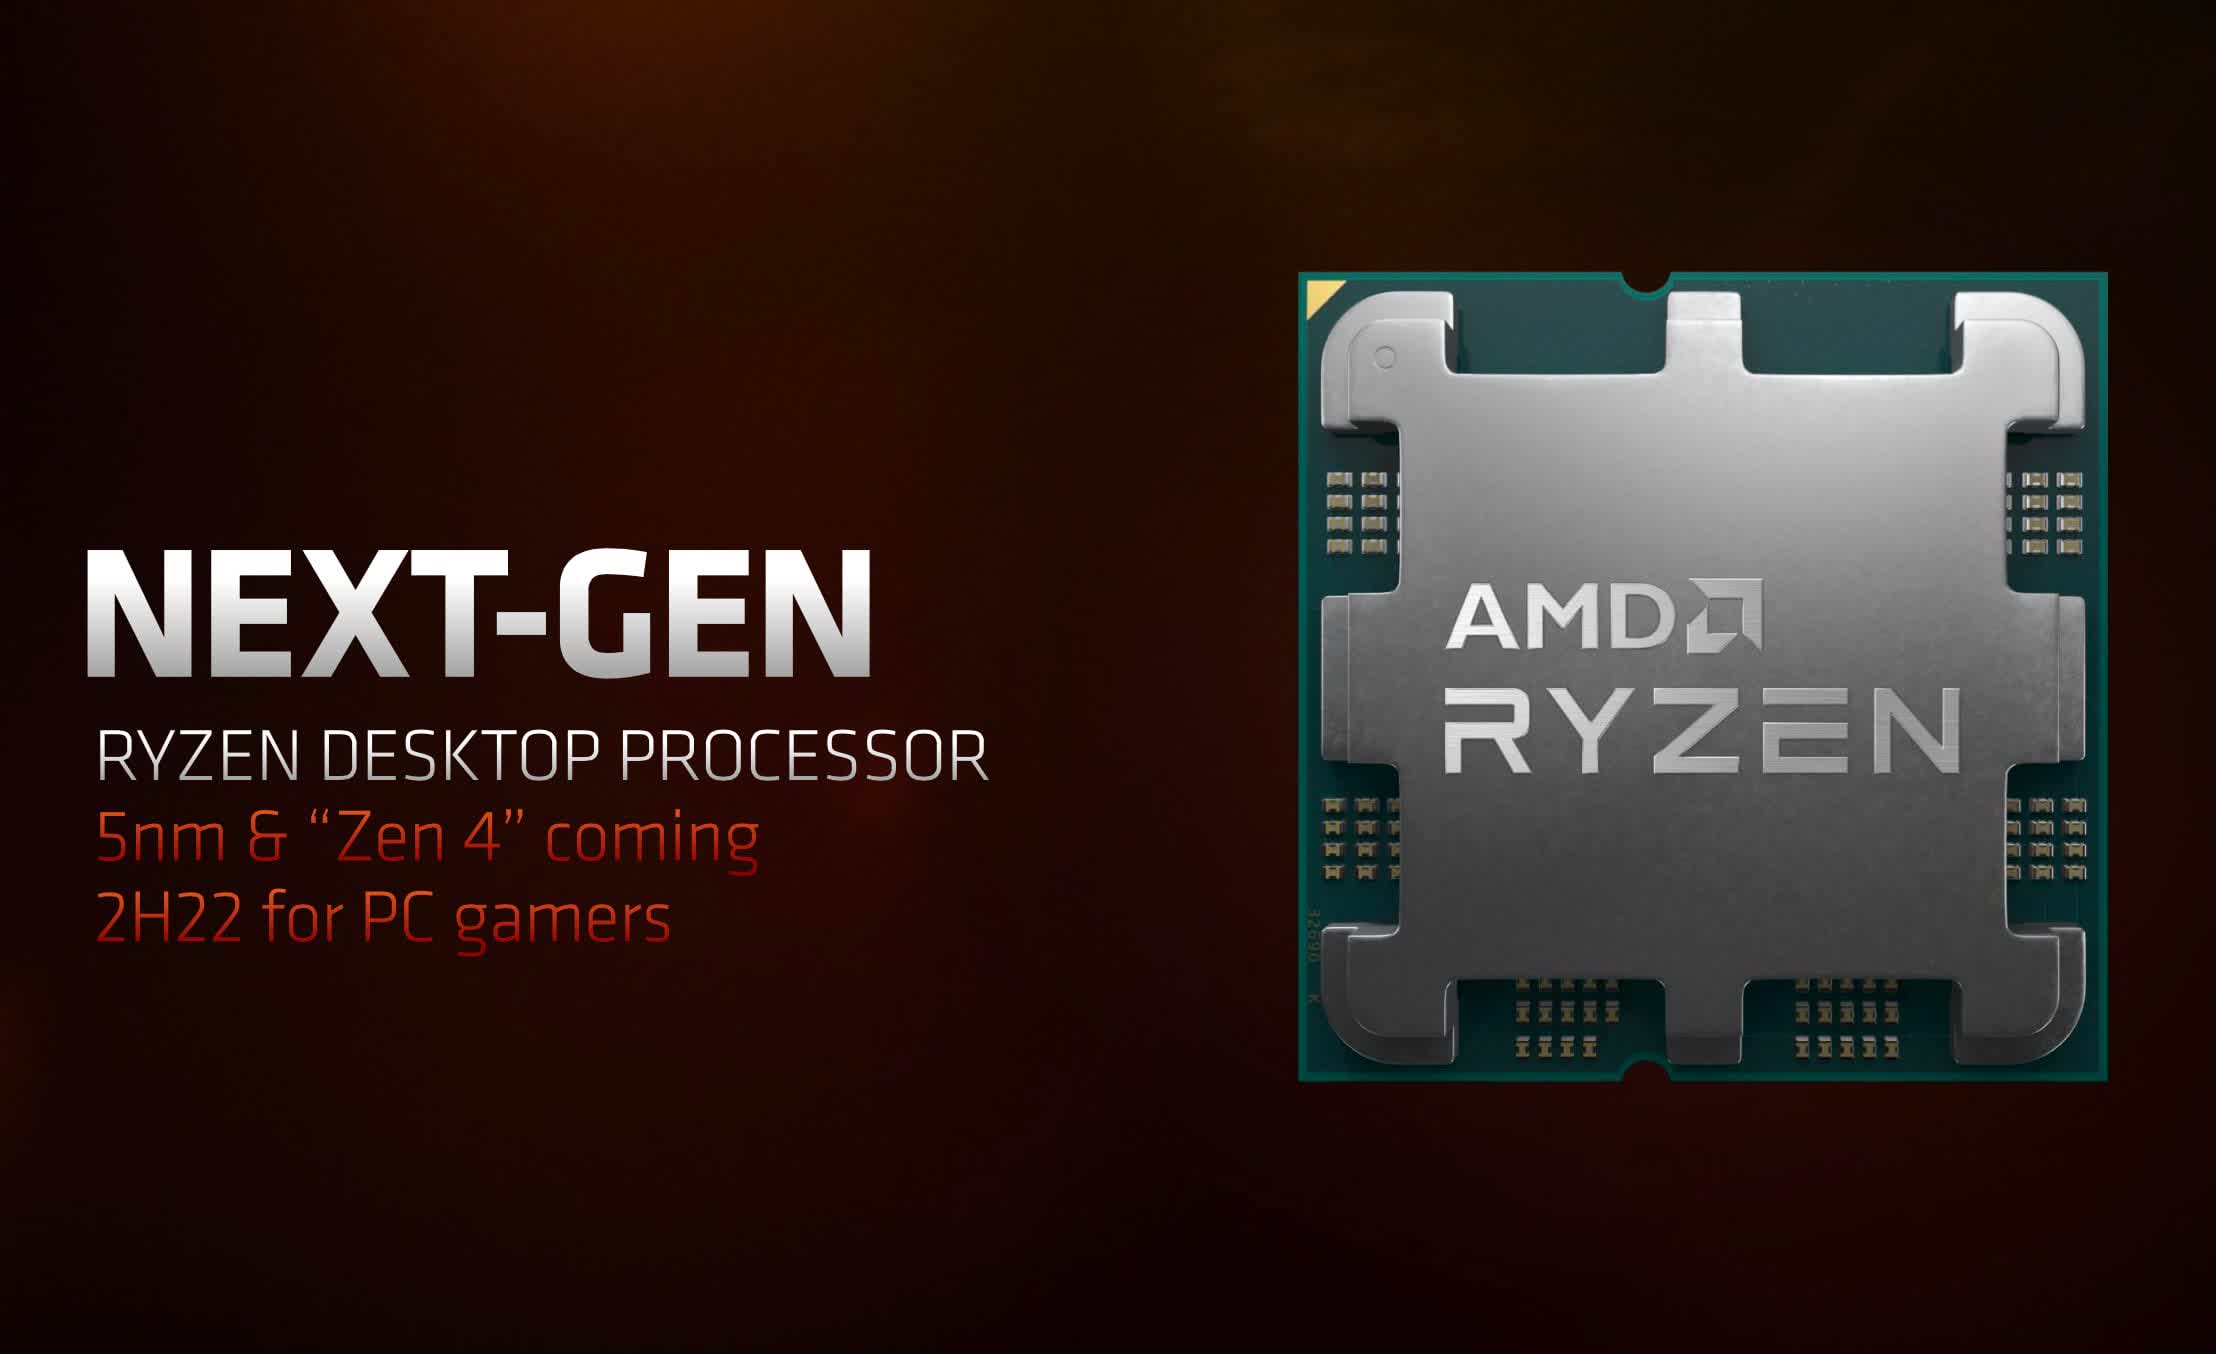 AMD at CES 2022: Roadmap to Zen 4 and AM5, Ryzen gets V-Cache, Ryzen 6000 mobile, more